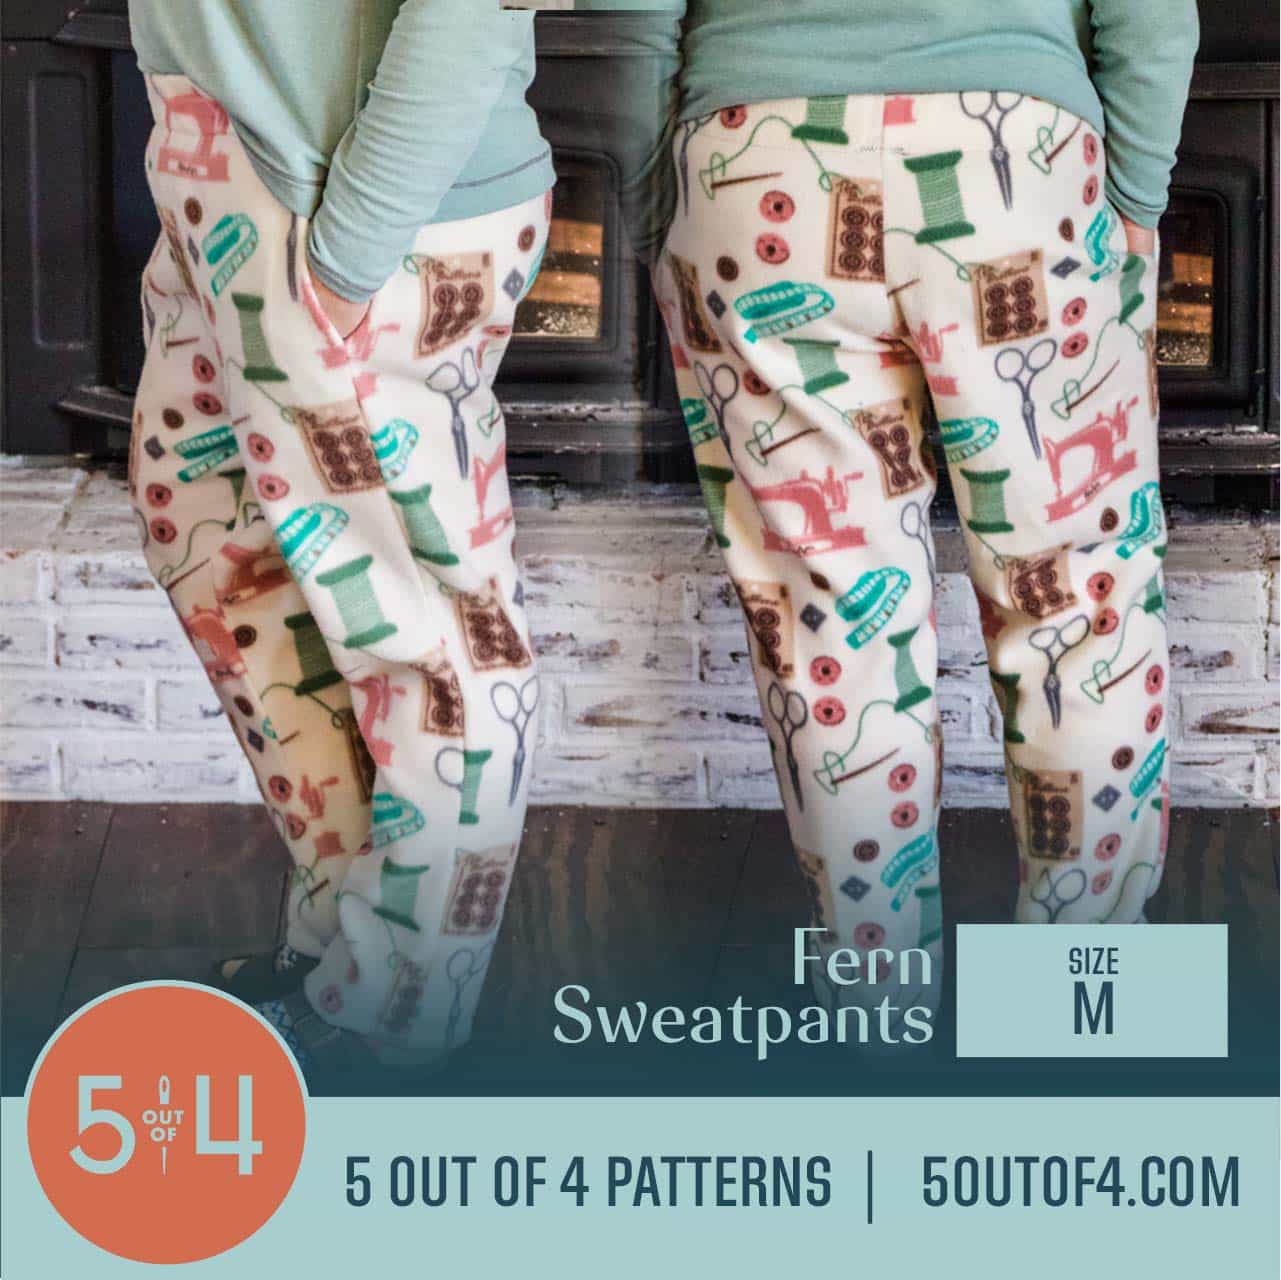 Fern Sweatpants - 5 out of 4 Patterns